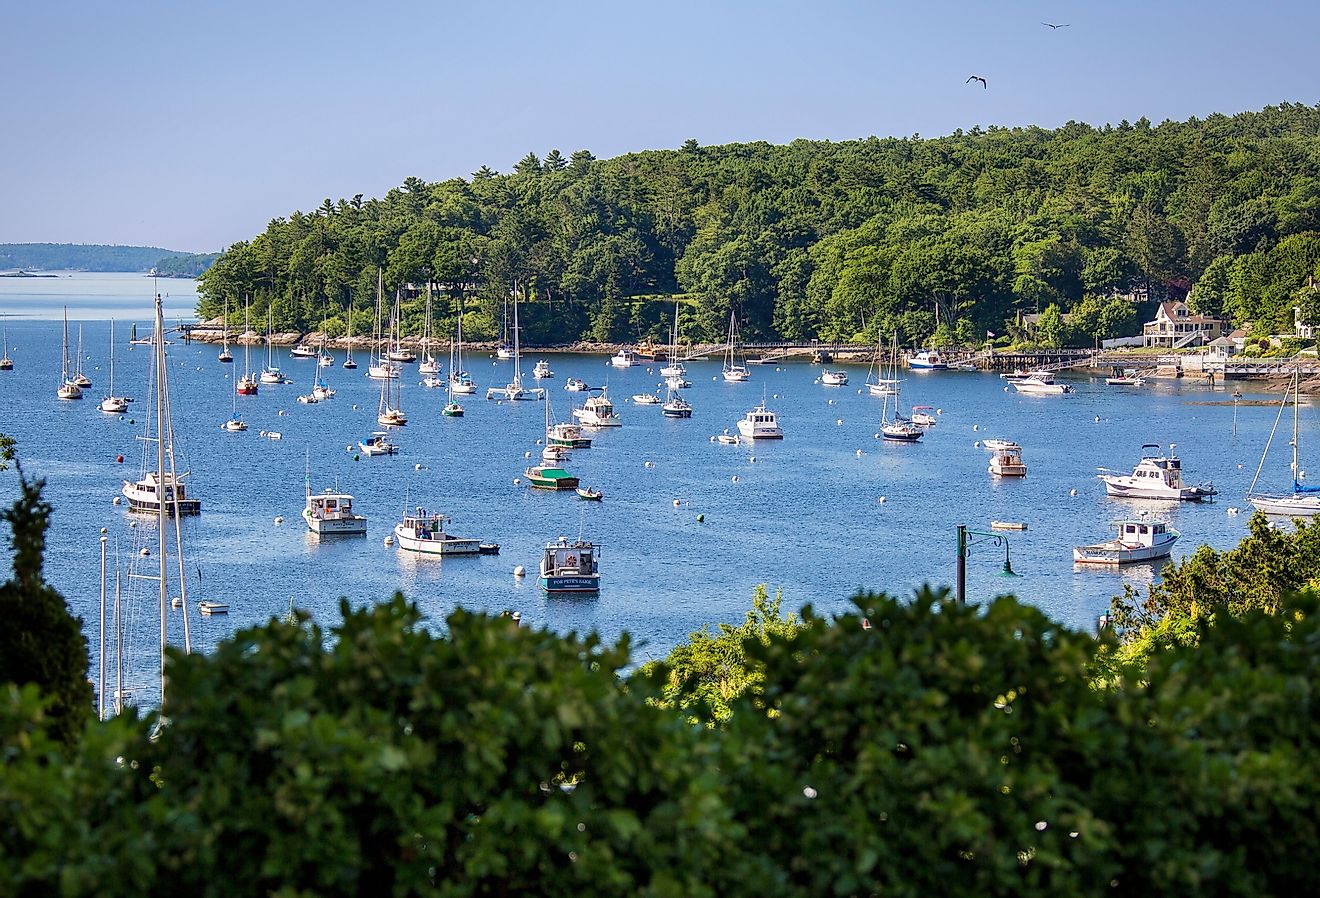 Sailboats and motorboats rest at anchor in Rockport Harbor, Maine, on a beautiful summer day.